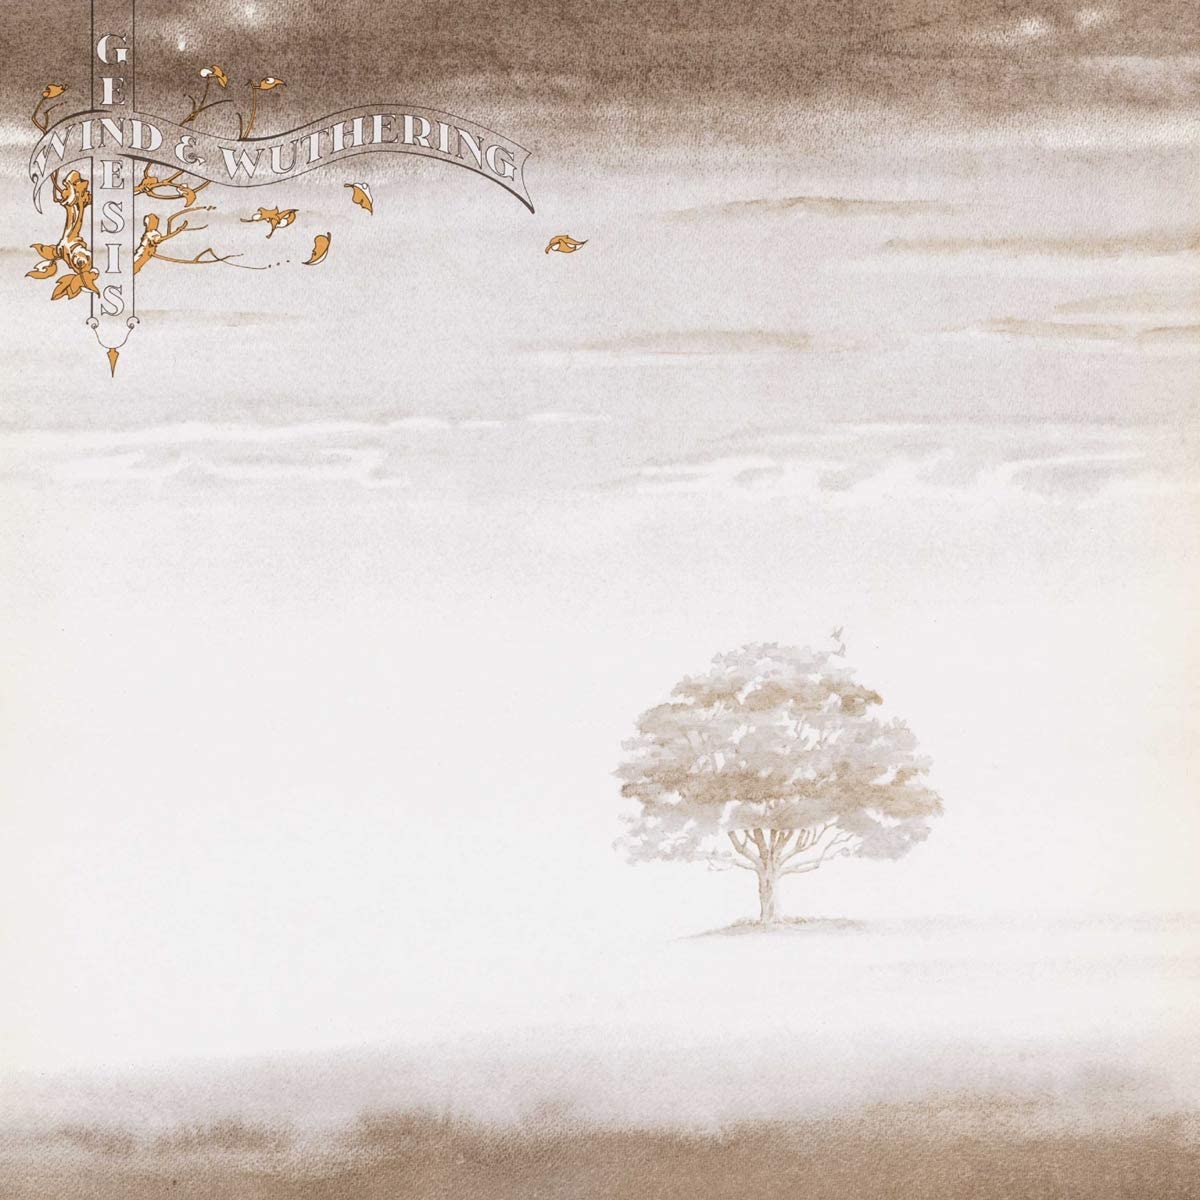 Wind And Wuthering | Genesis